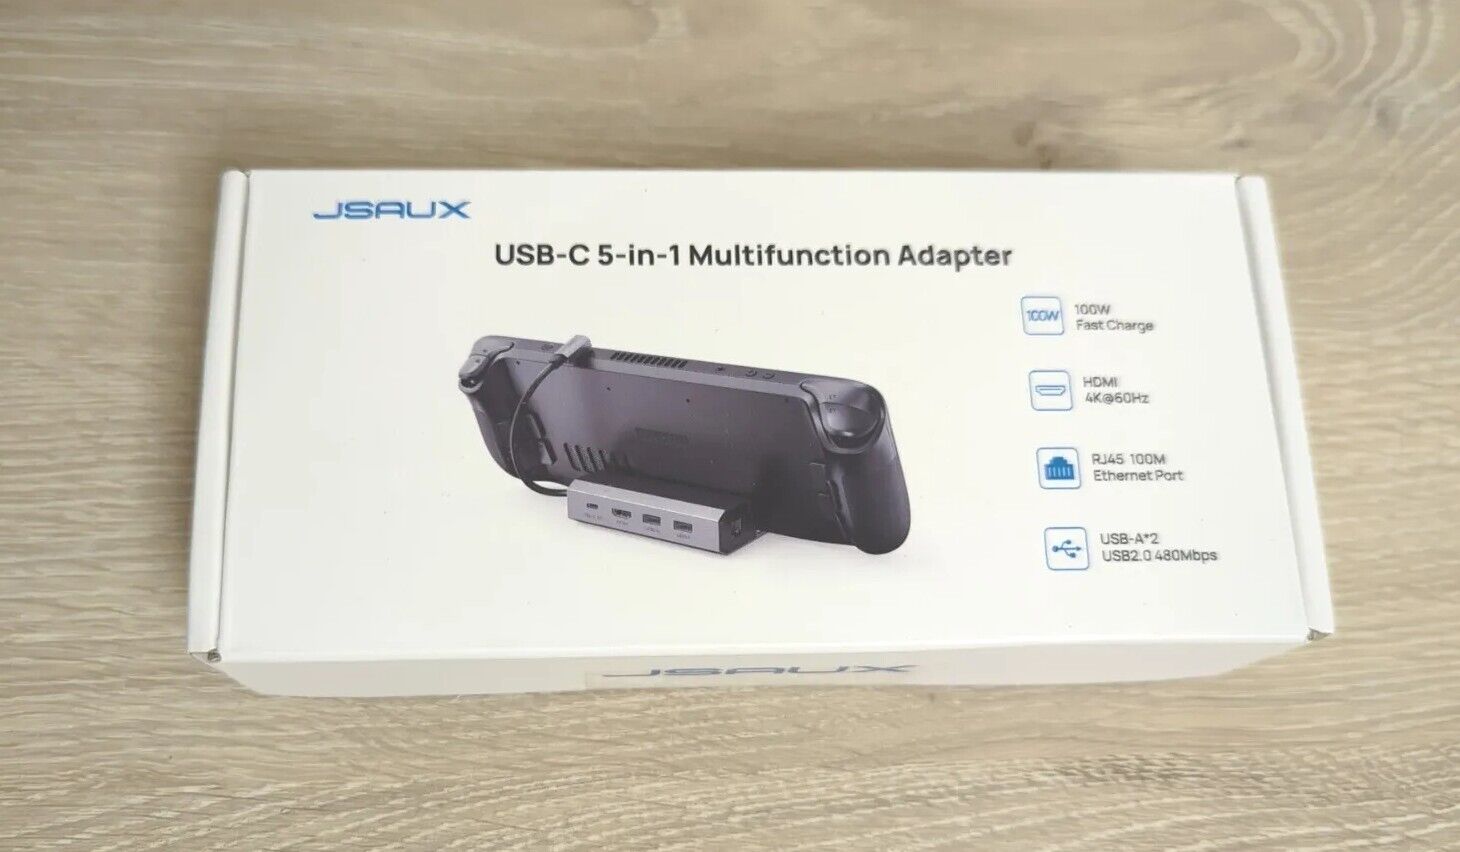 New sealed box- JSAUX USB-C 5 in 1 Multifunction Adapter